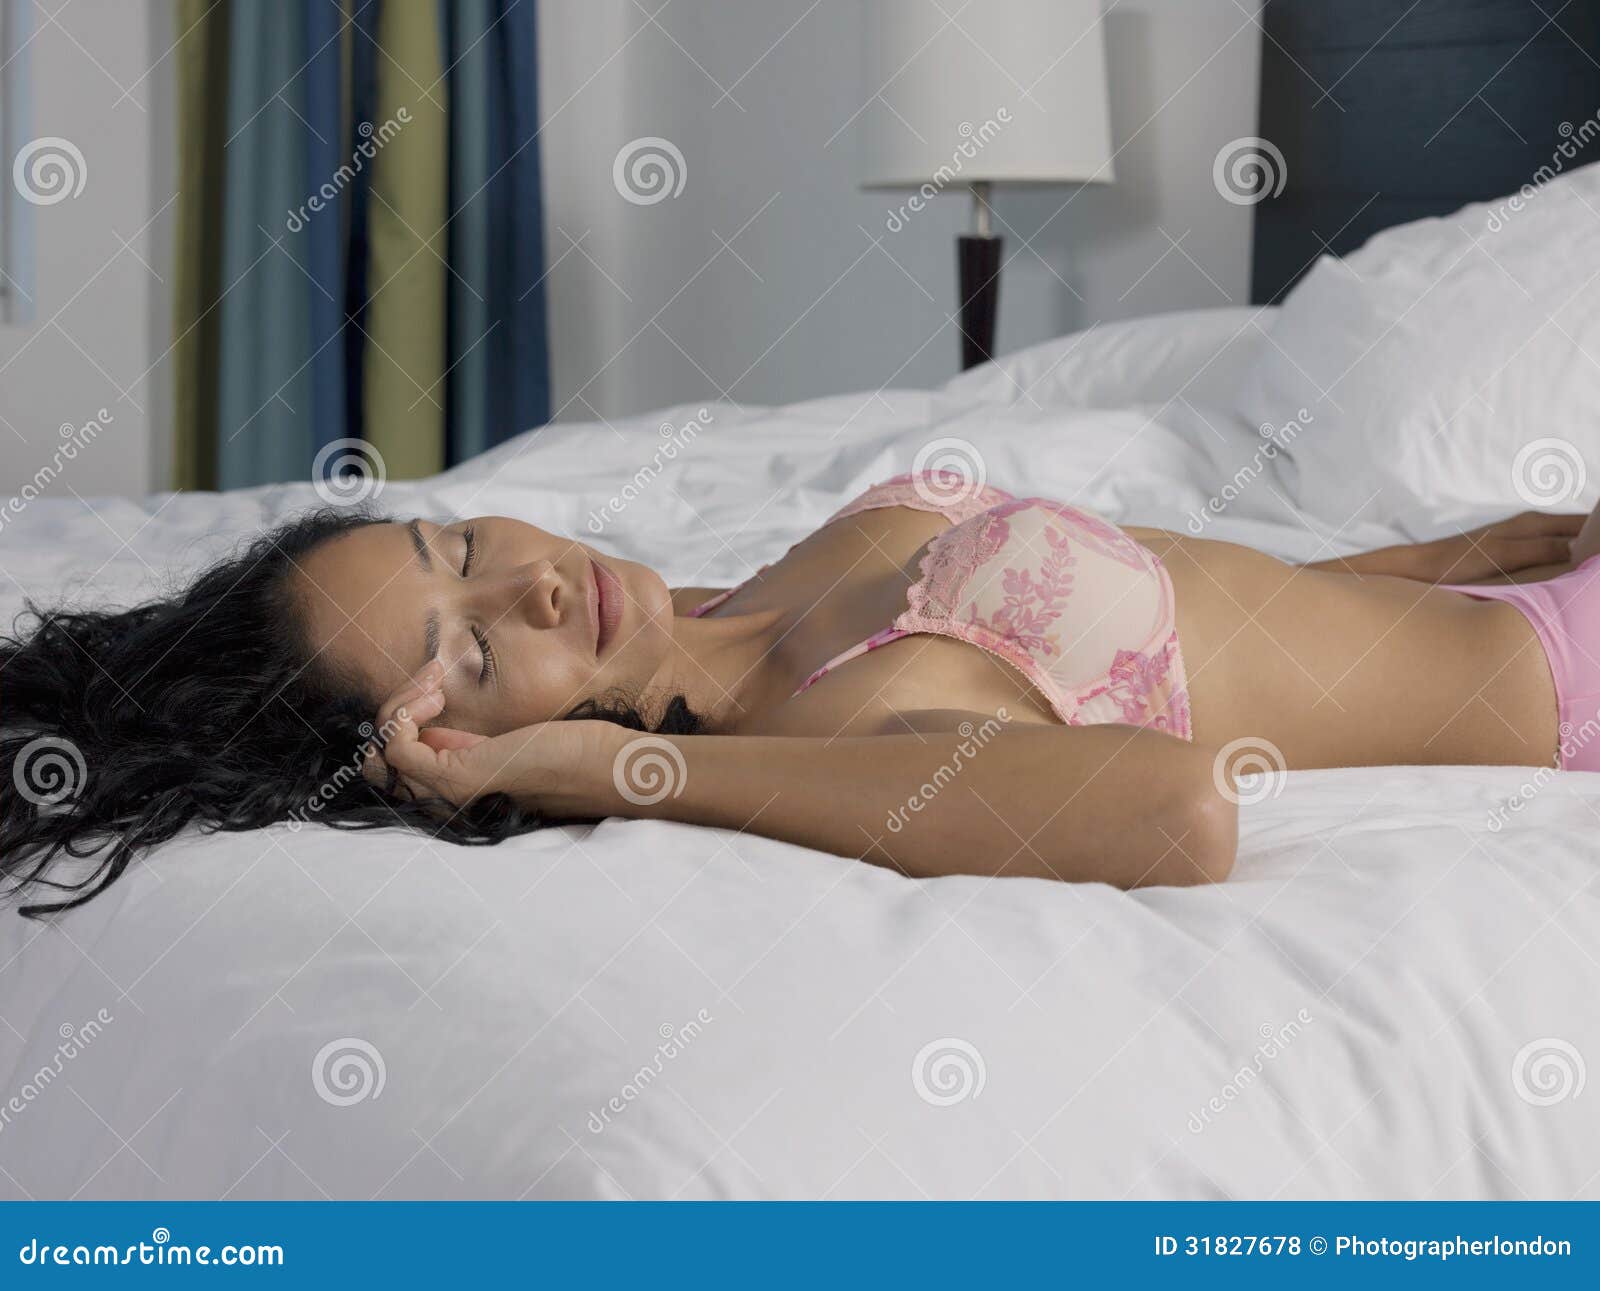 Woman in Lingerie Sleeping on Bed Stock Photo - Image of room